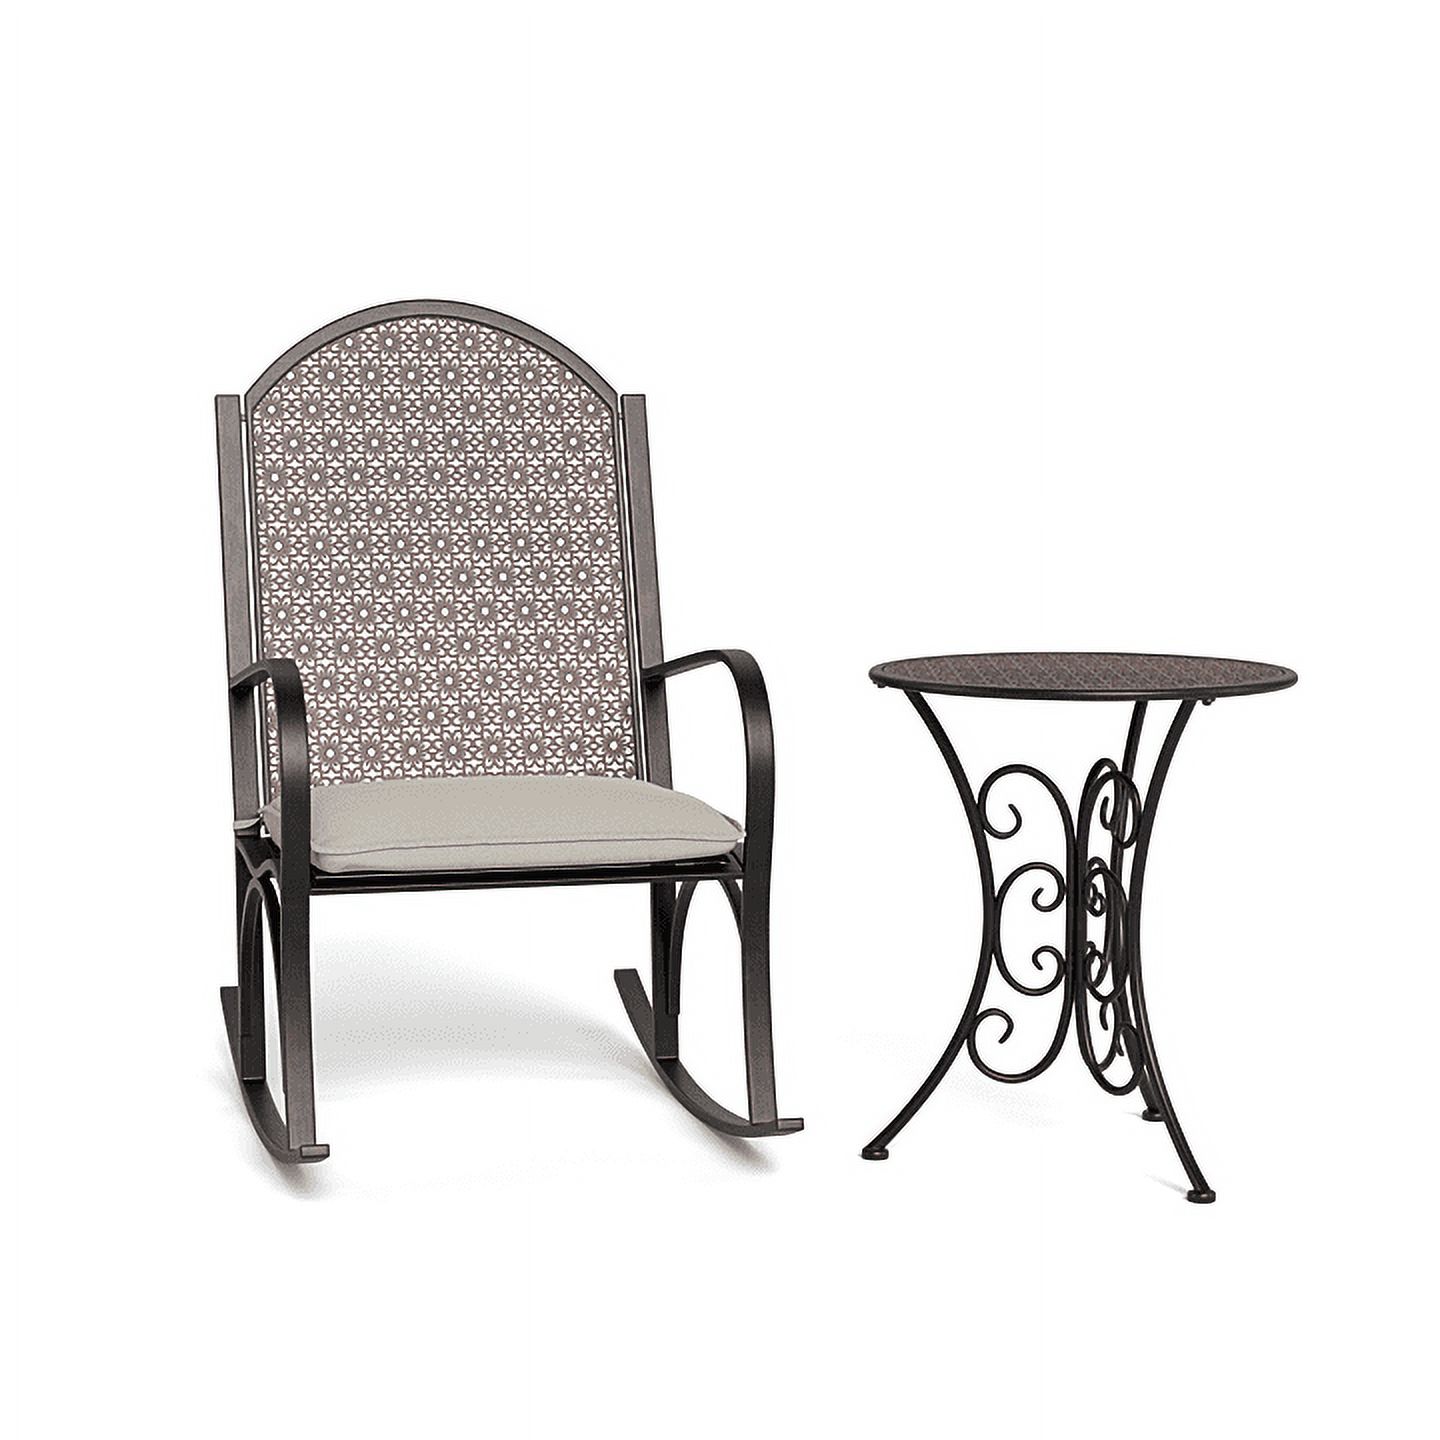 Tortuga Outdoor Garden Rocking Chair with Side Table - Oiled Copper Finish, Beige Cushion - image 1 of 11